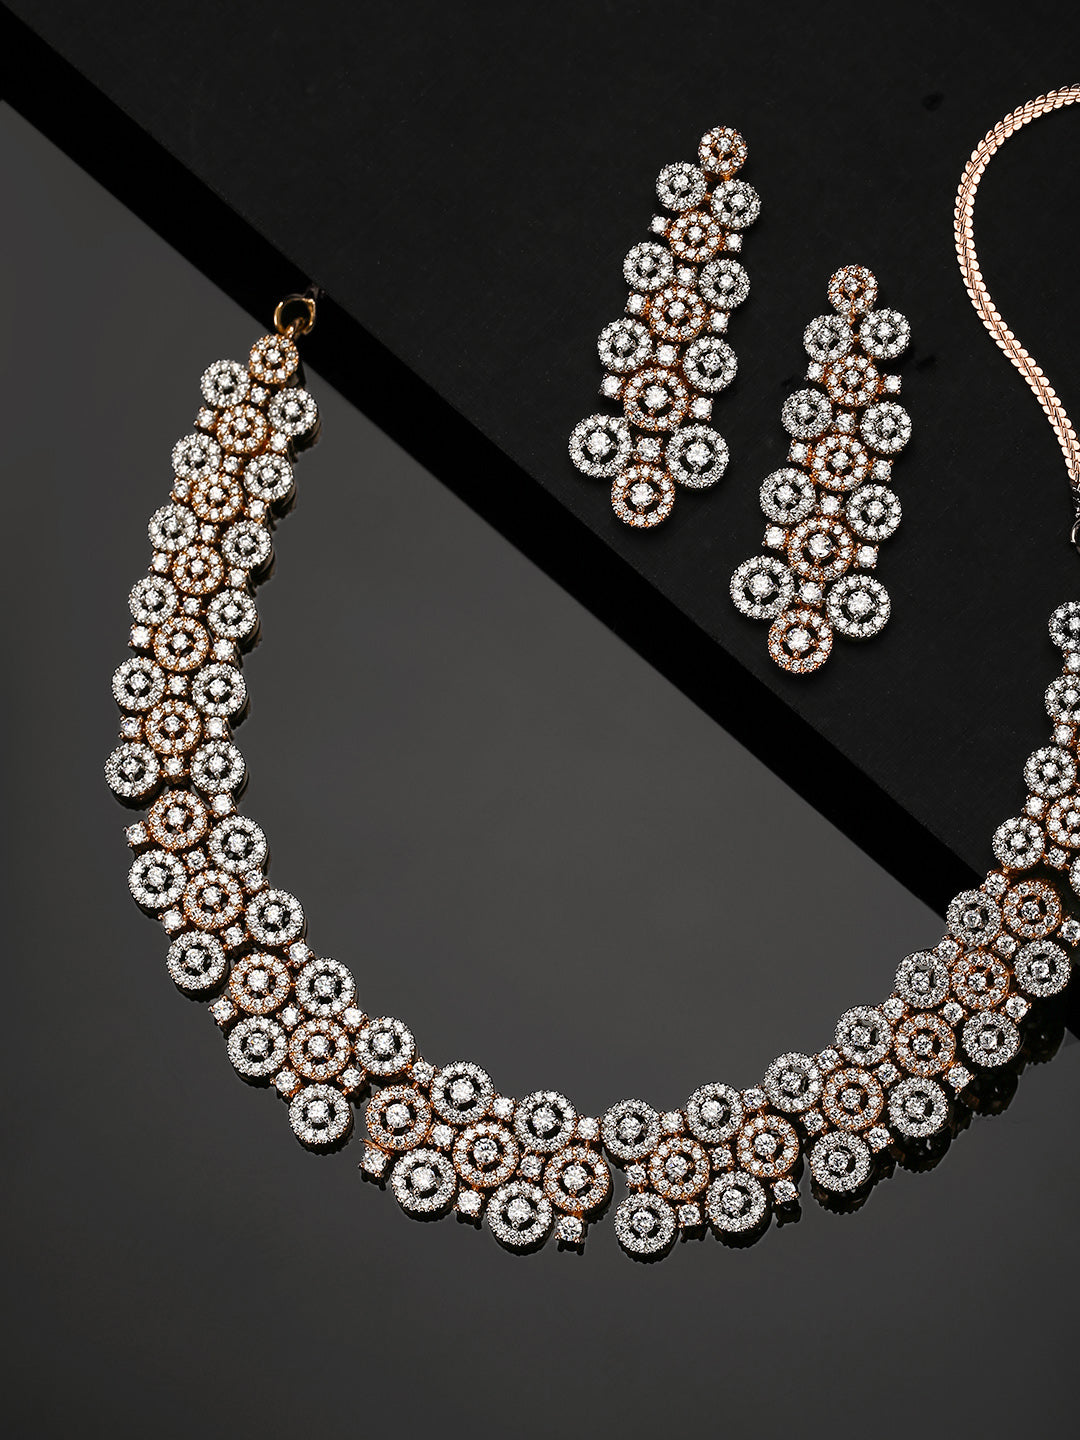 Keeping it on-trend with American Diamonds the new must-have of traditional jewellery